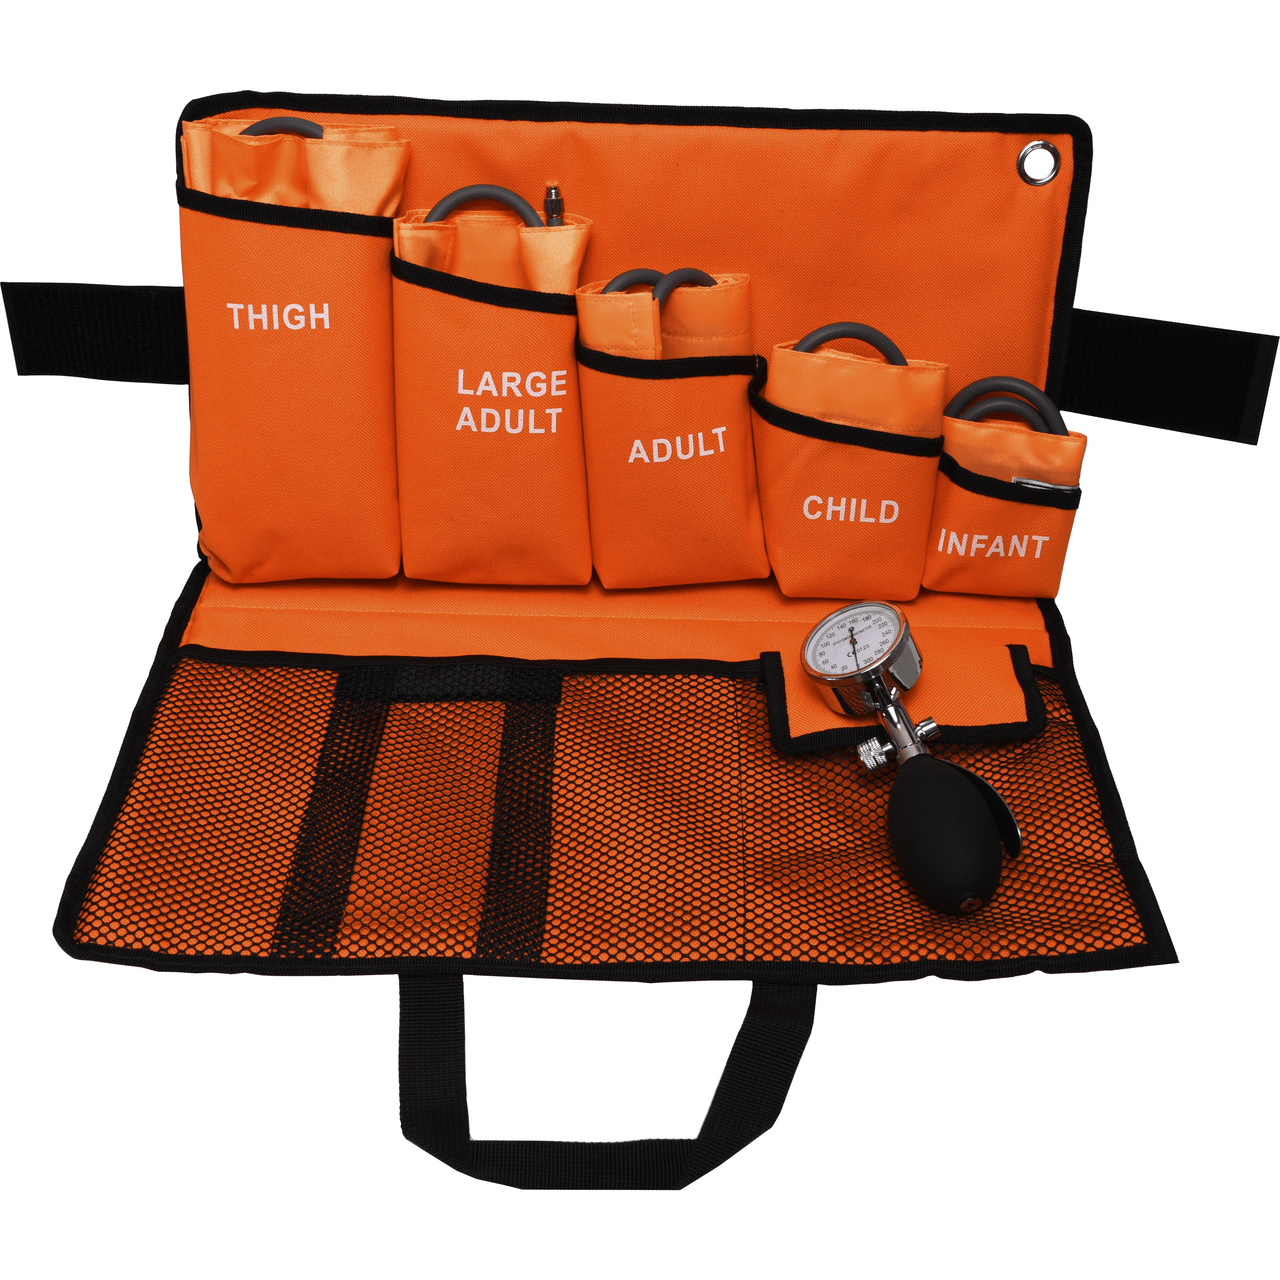 Paramedic Shop Add-Tech Pty Ltd Instrument Blood Pressure Kit -  Sphygmo, Infant, Child, Adult, Large Adult, and Thigh Cuffs